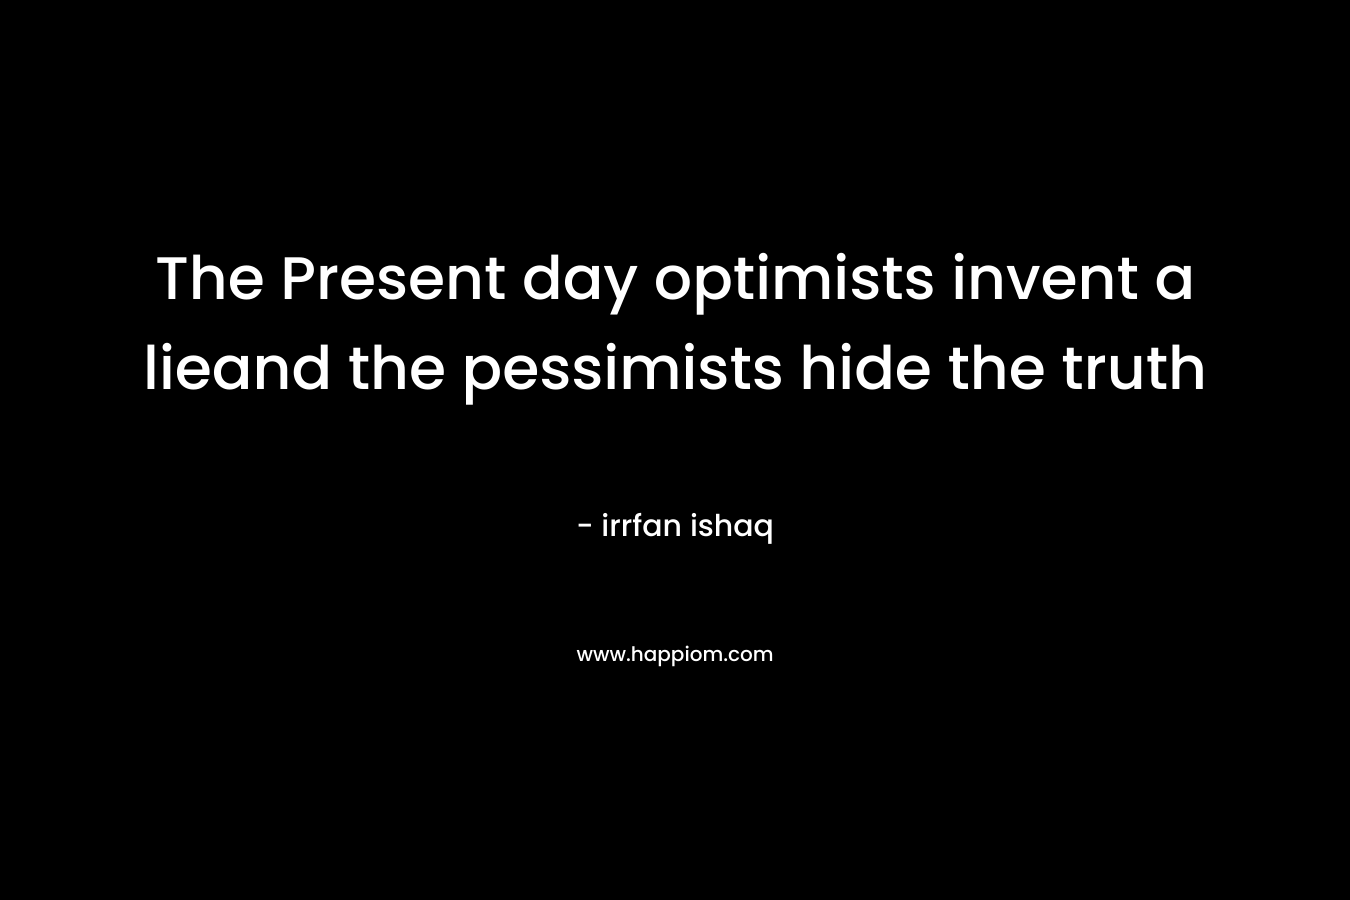 The Present day optimists invent a lieand the pessimists hide the truth